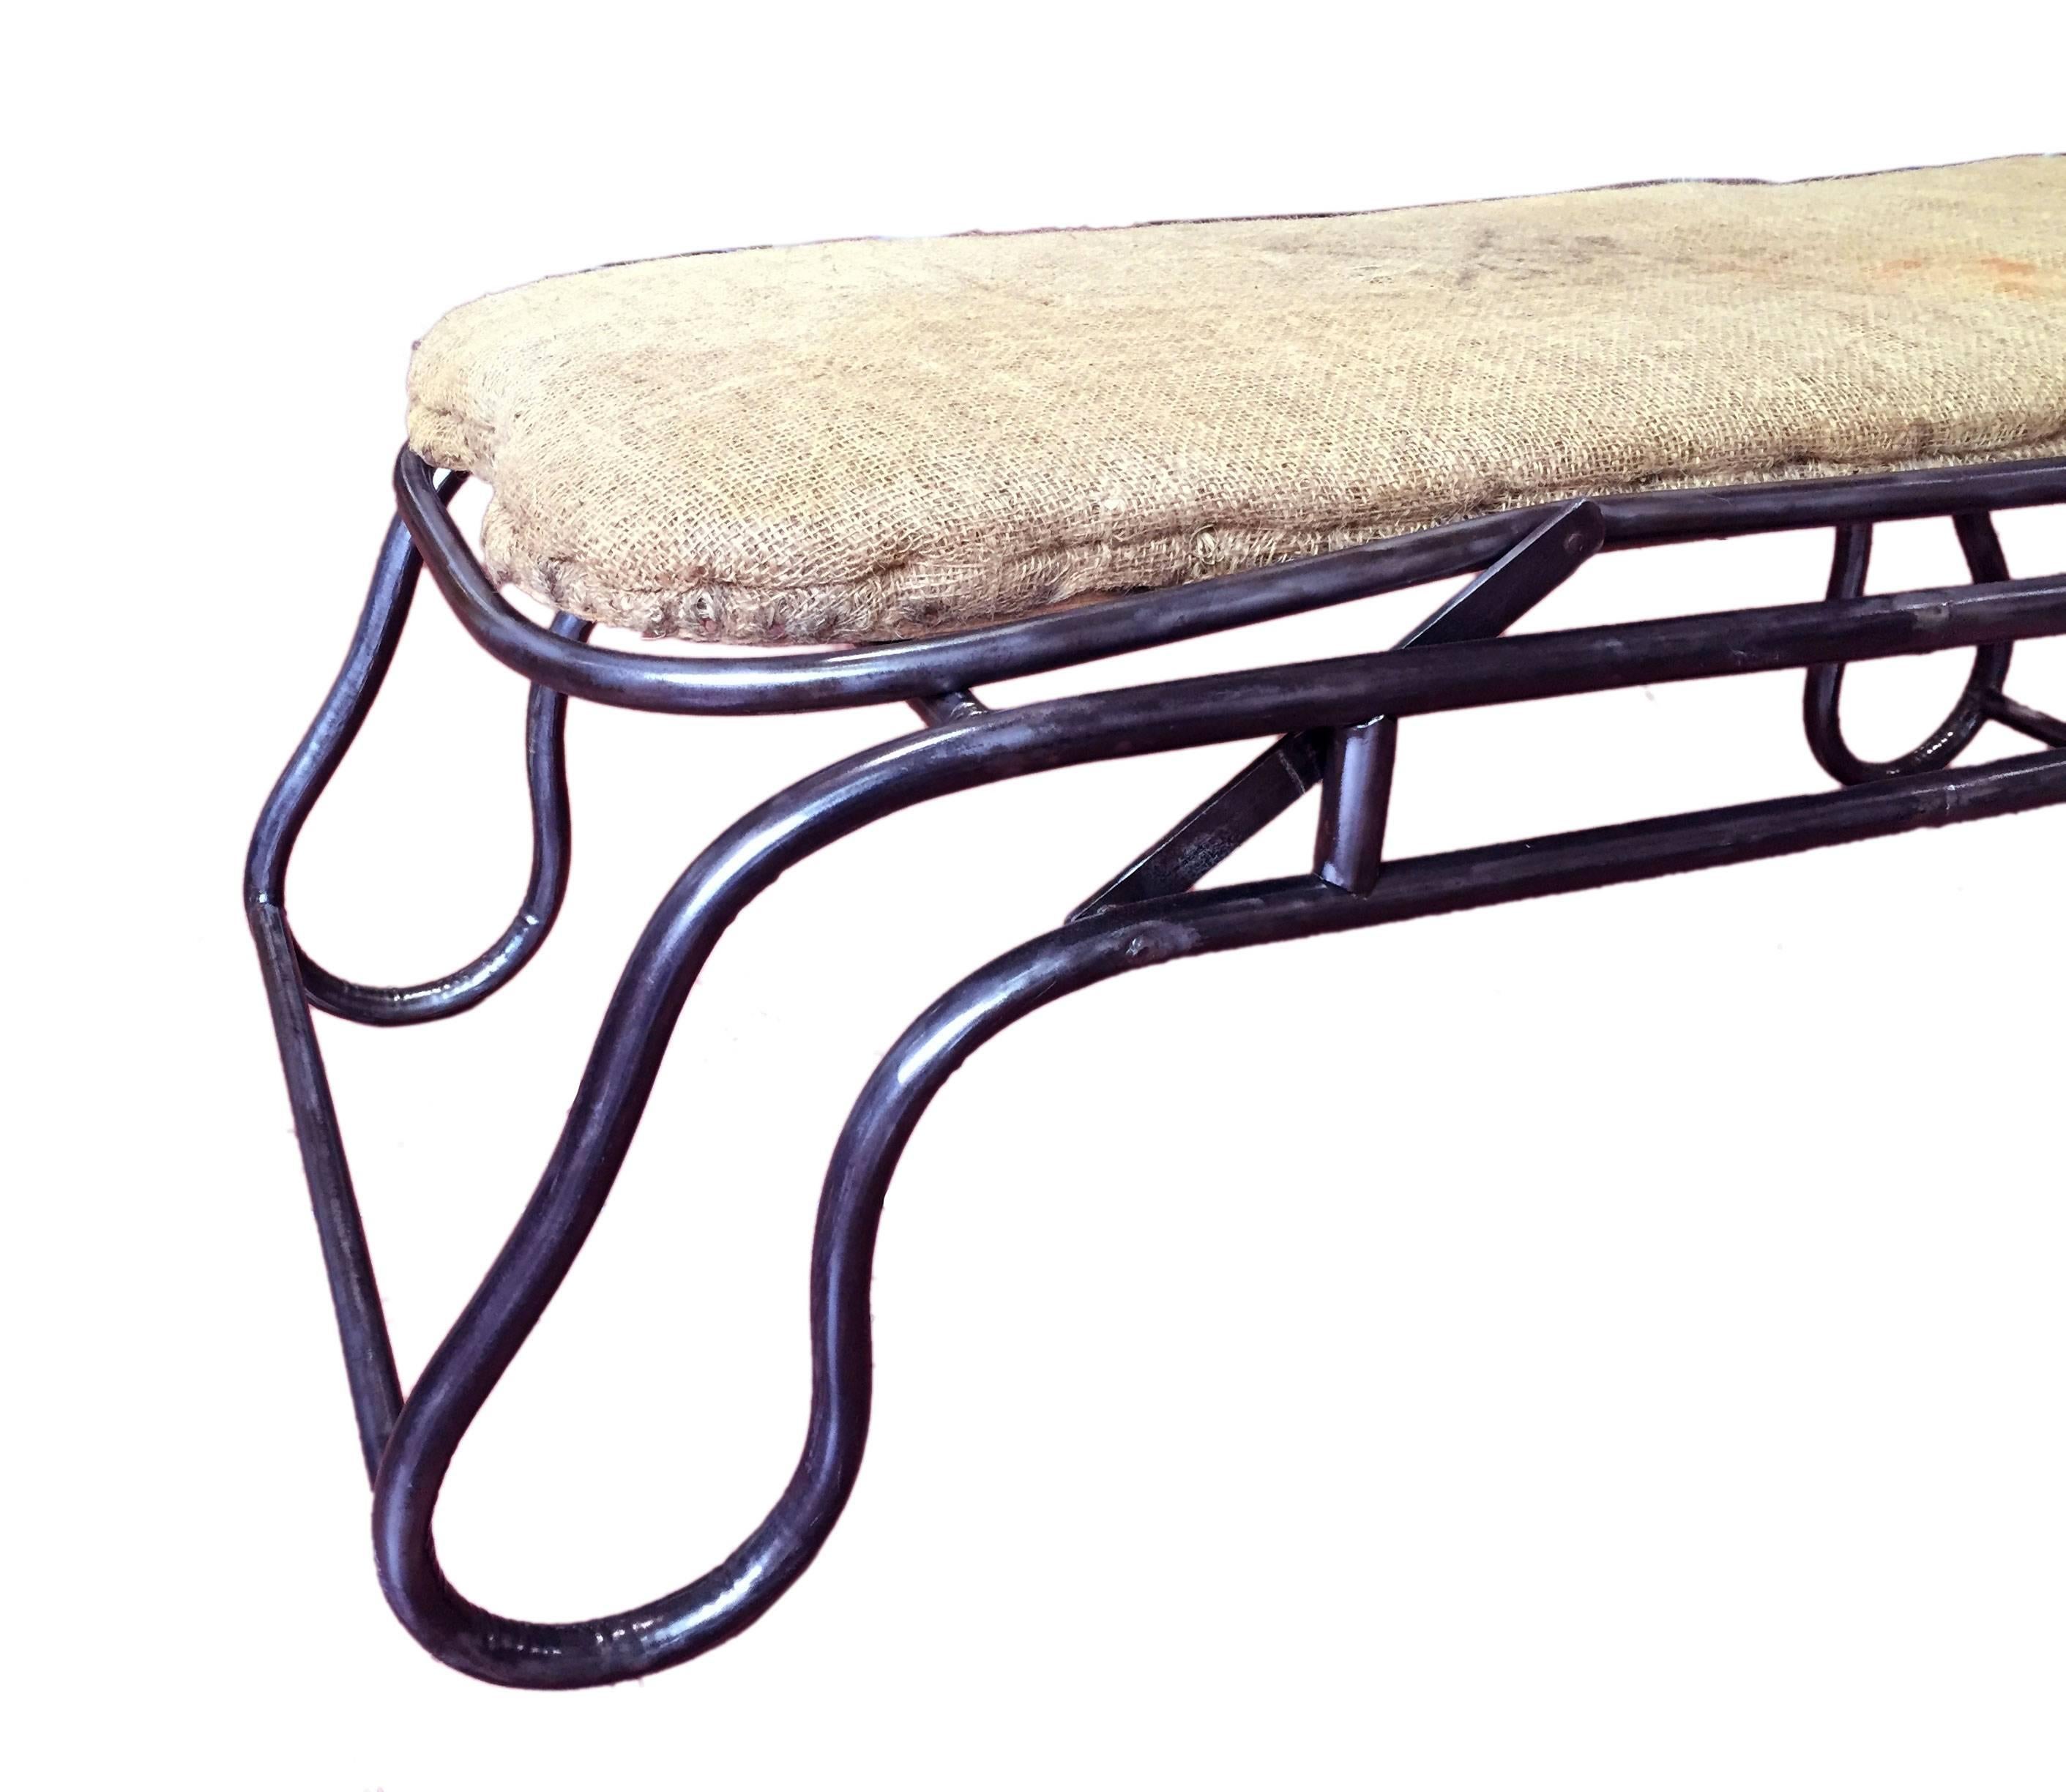 Splendid example of design for a chaise longue. The structure is made out of iron preciously curved in a superb movement. By lifting the feet side of the chaise, the entire bed rise. Original canvas, France, circa 1900.